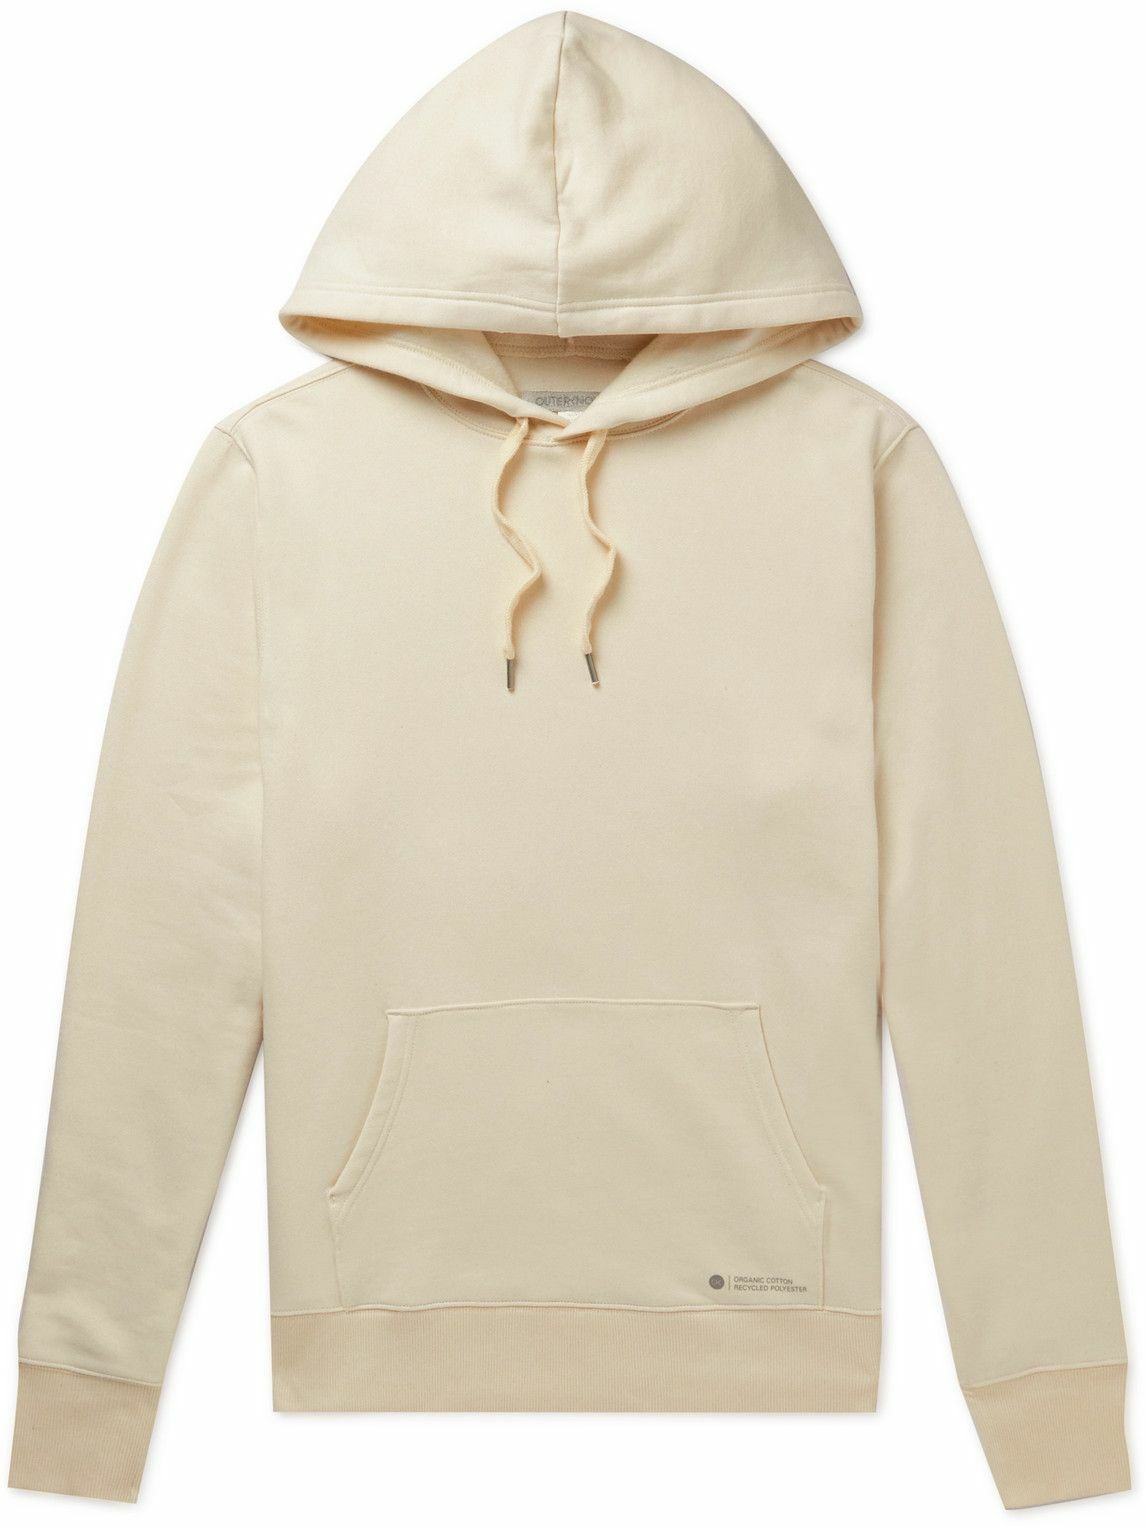 Outerknown - All-Day Organic Cotton-Blend Jersey Hoodie - White Outerknown